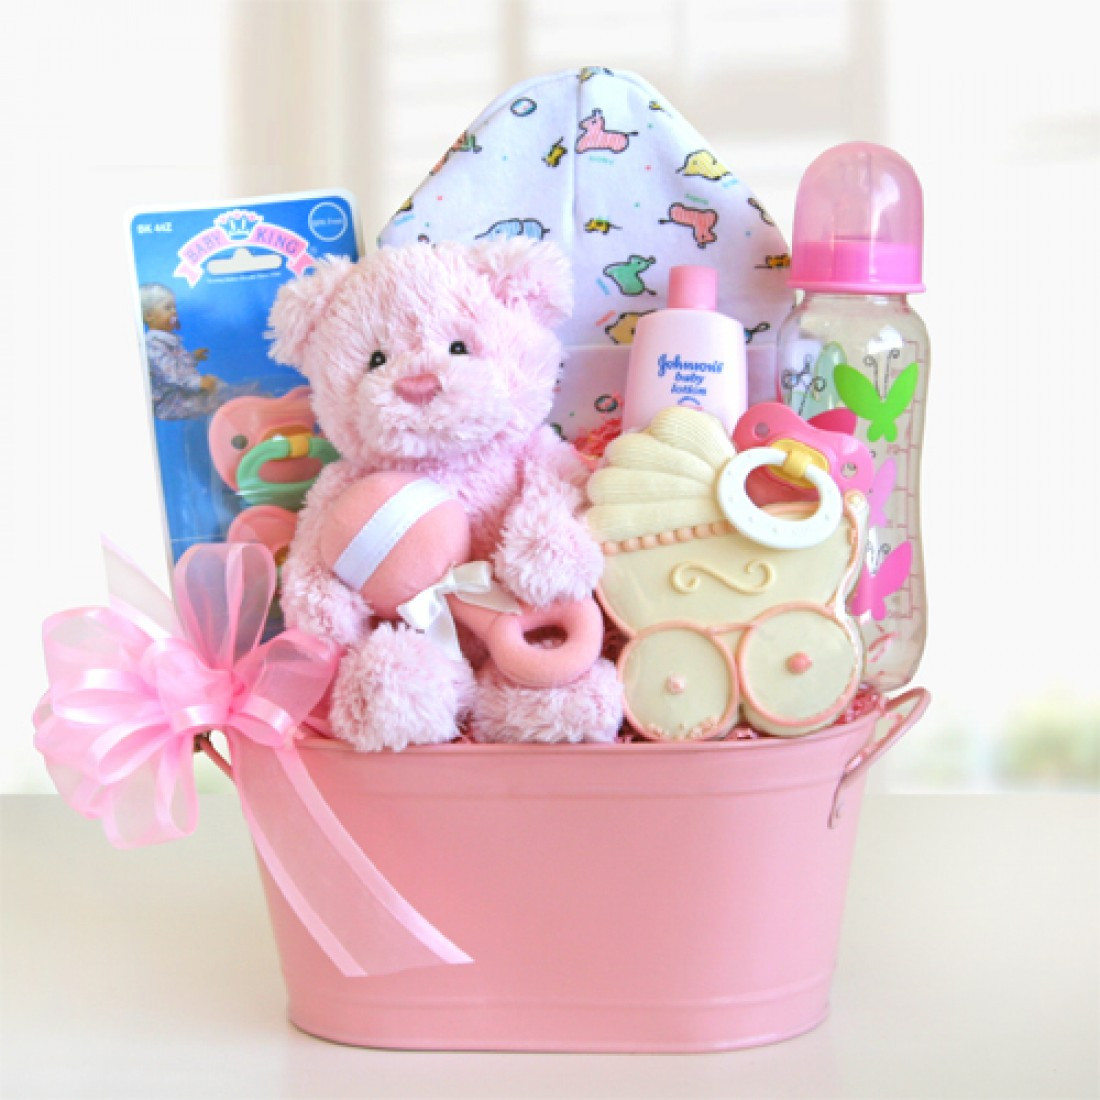 Gift Basket New Baby
 Cute Package New Baby Gift Baskets